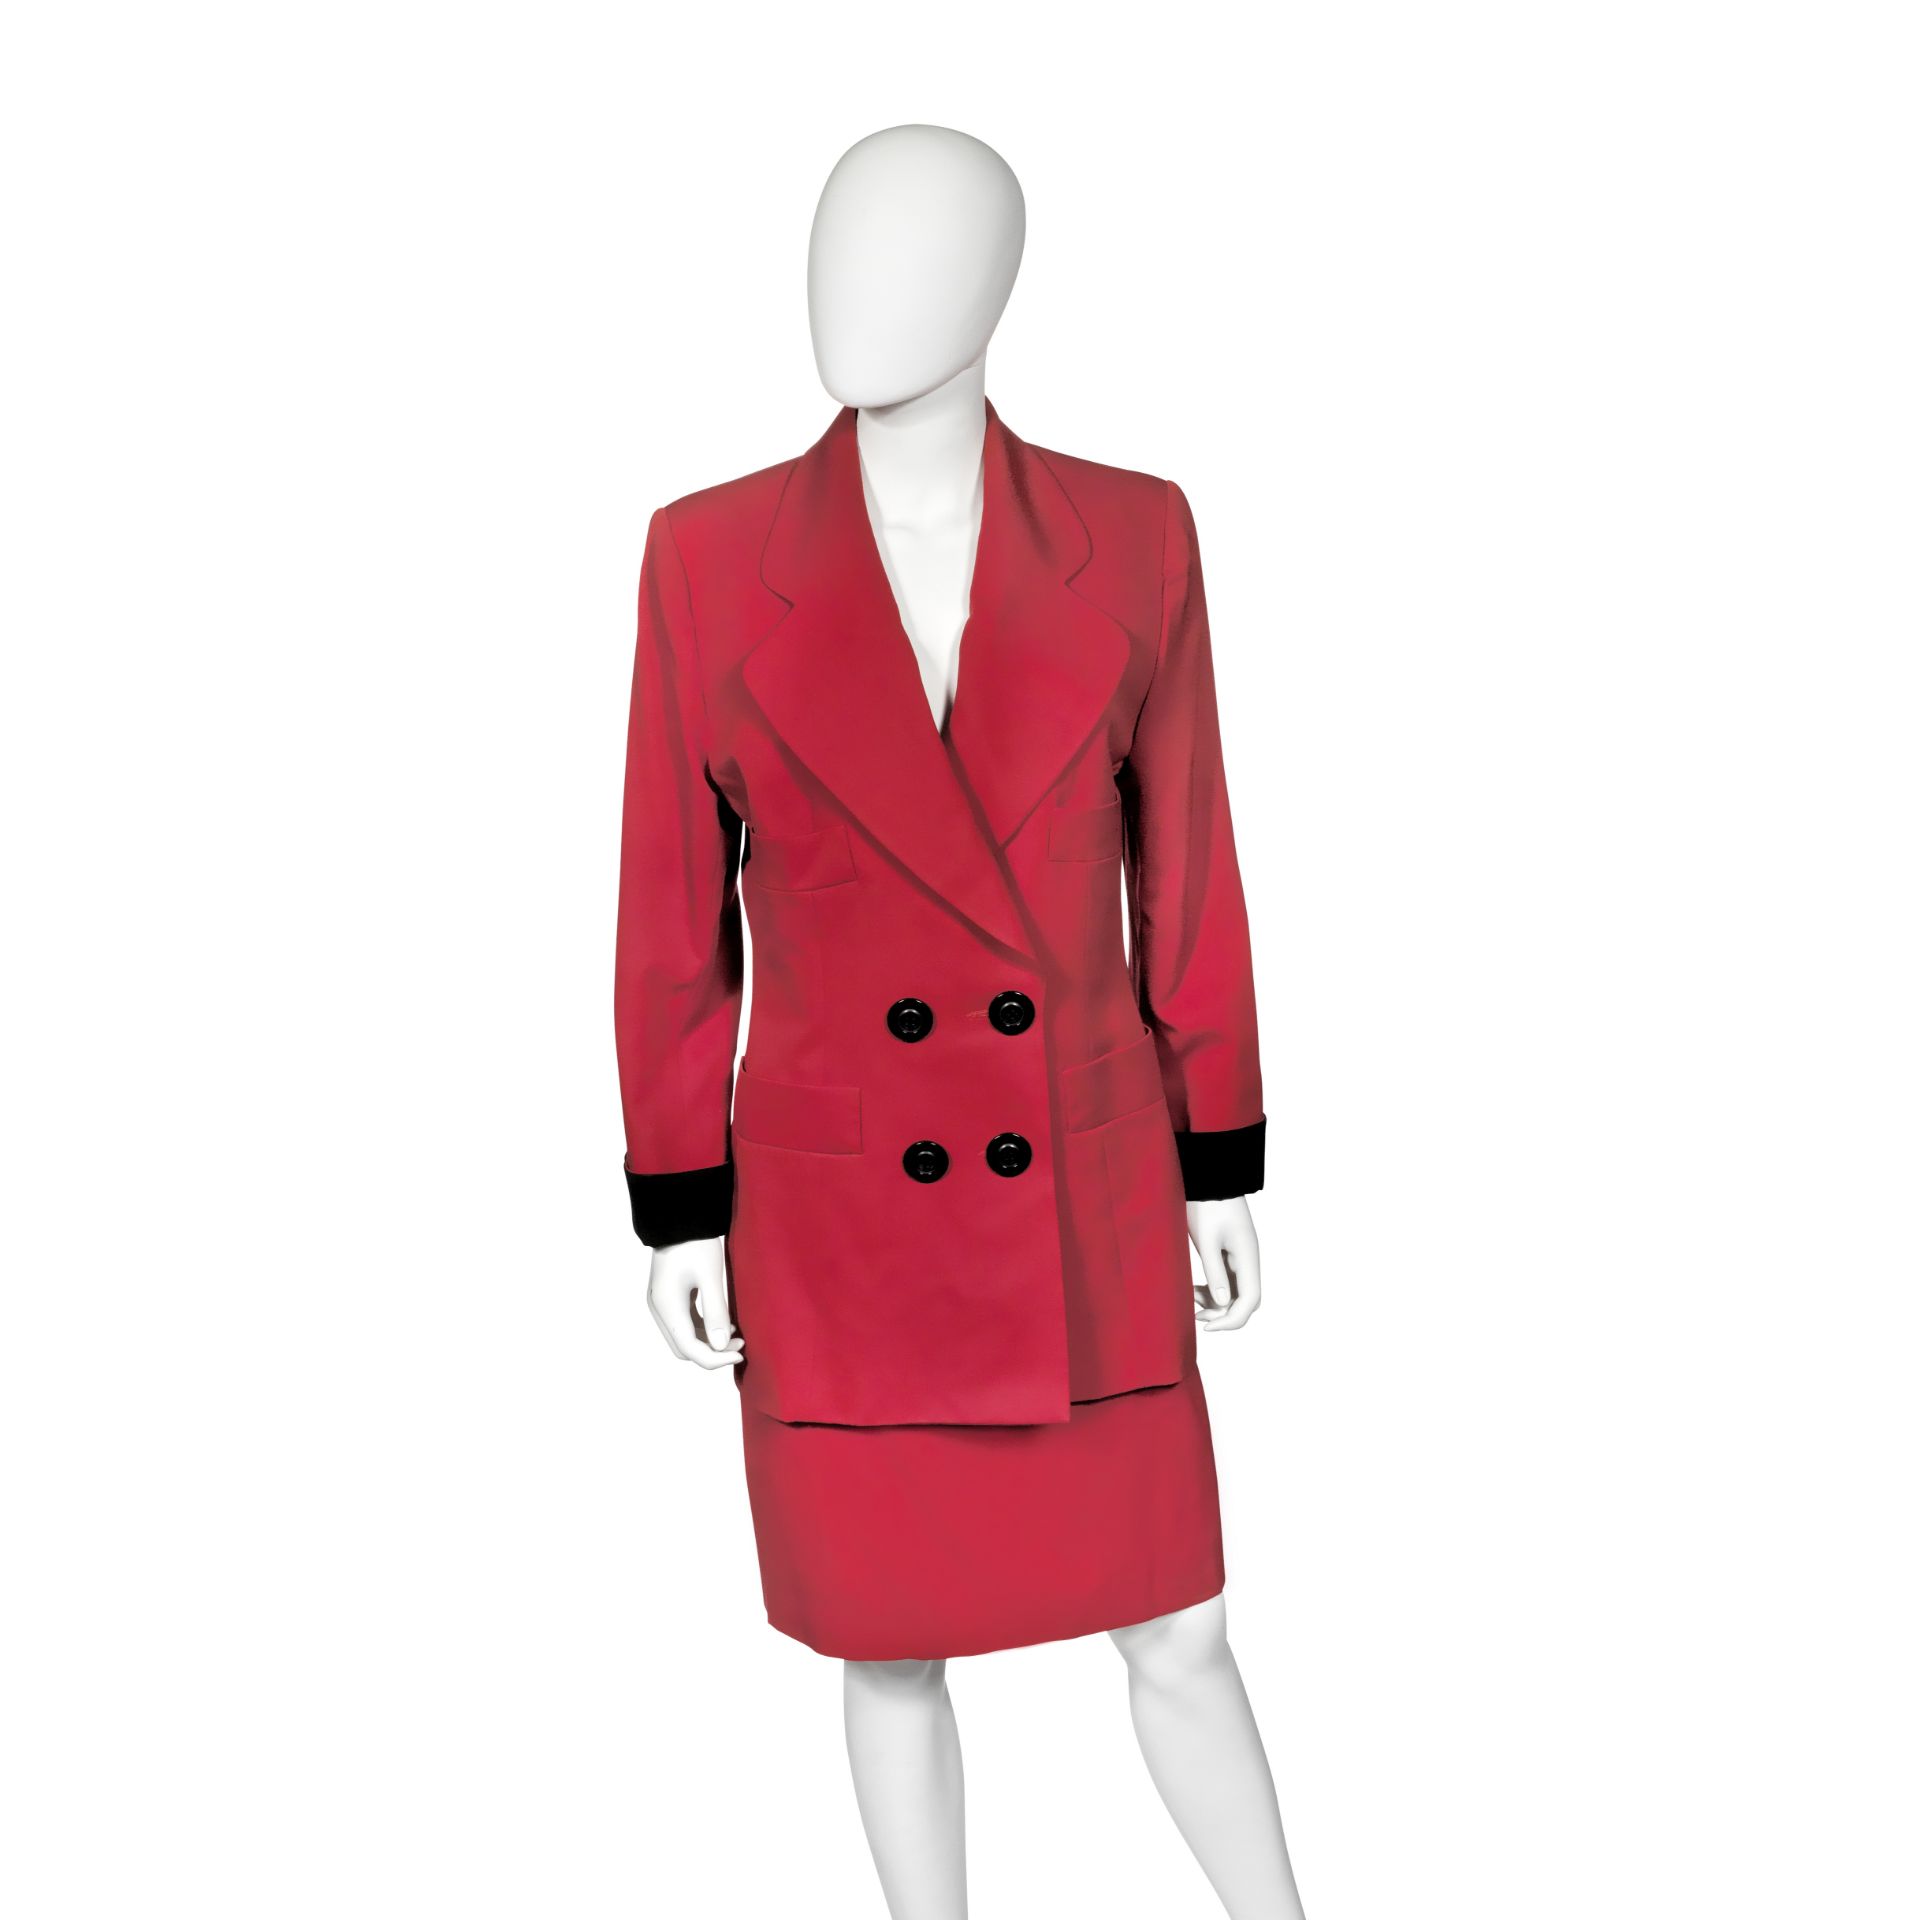 Demi Couture Red and Black Skirt Suit, Christian Dior, 1990s,